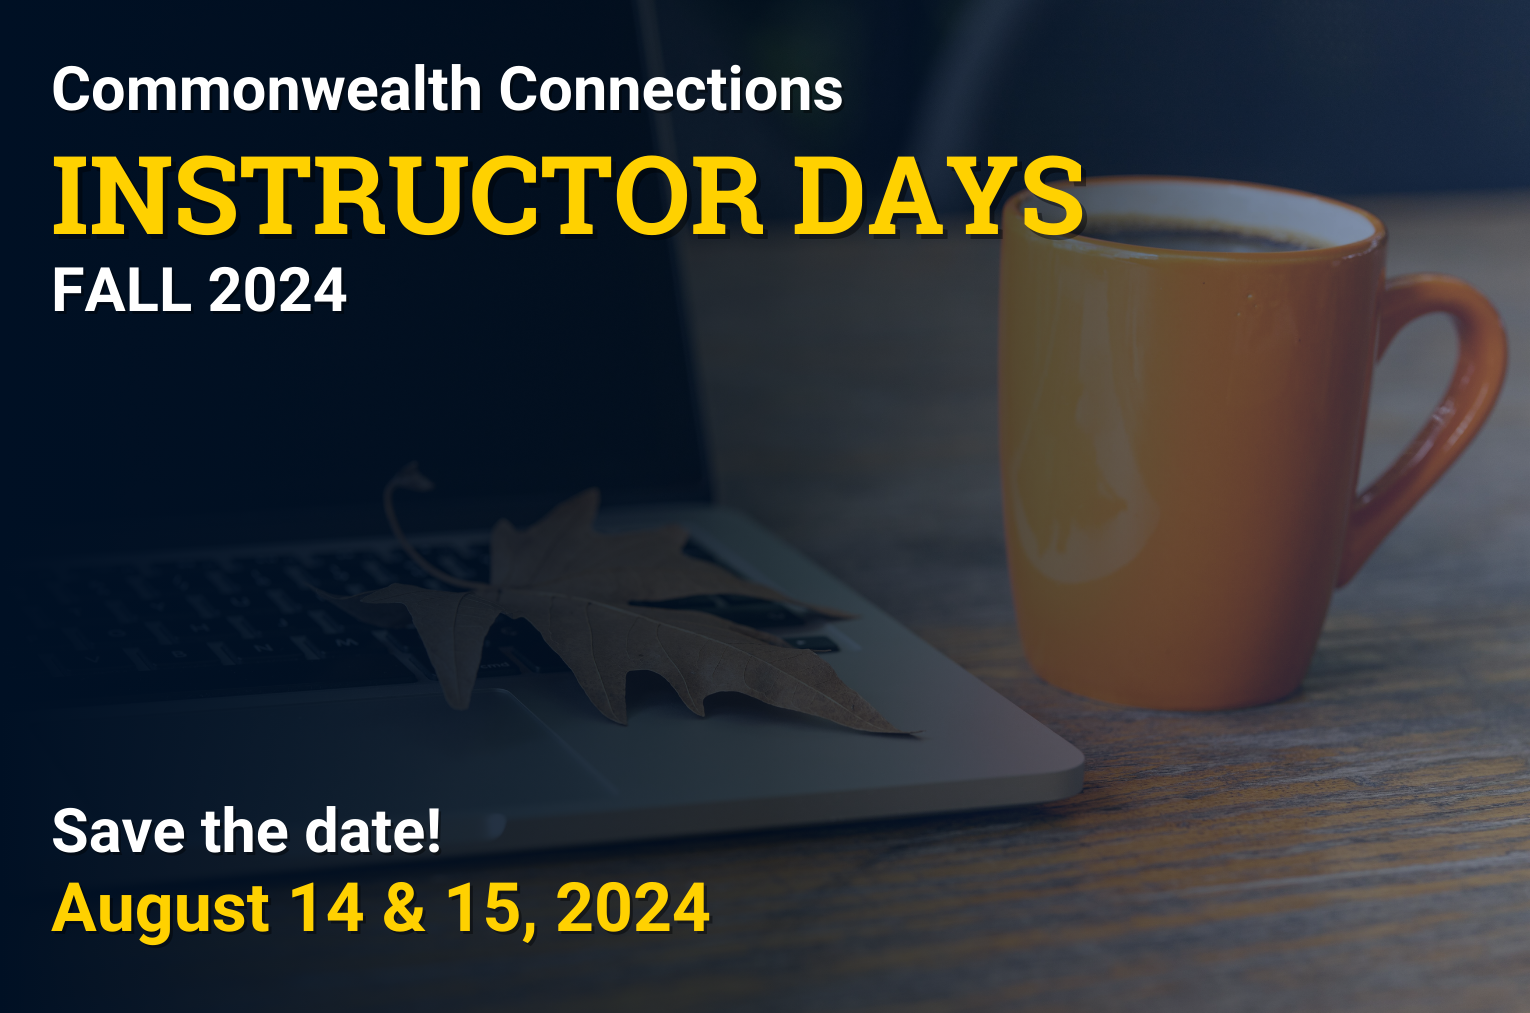 Commonwealth Connections Instructor Days Fall 2024, Save the date! August 14th and 15th 2024